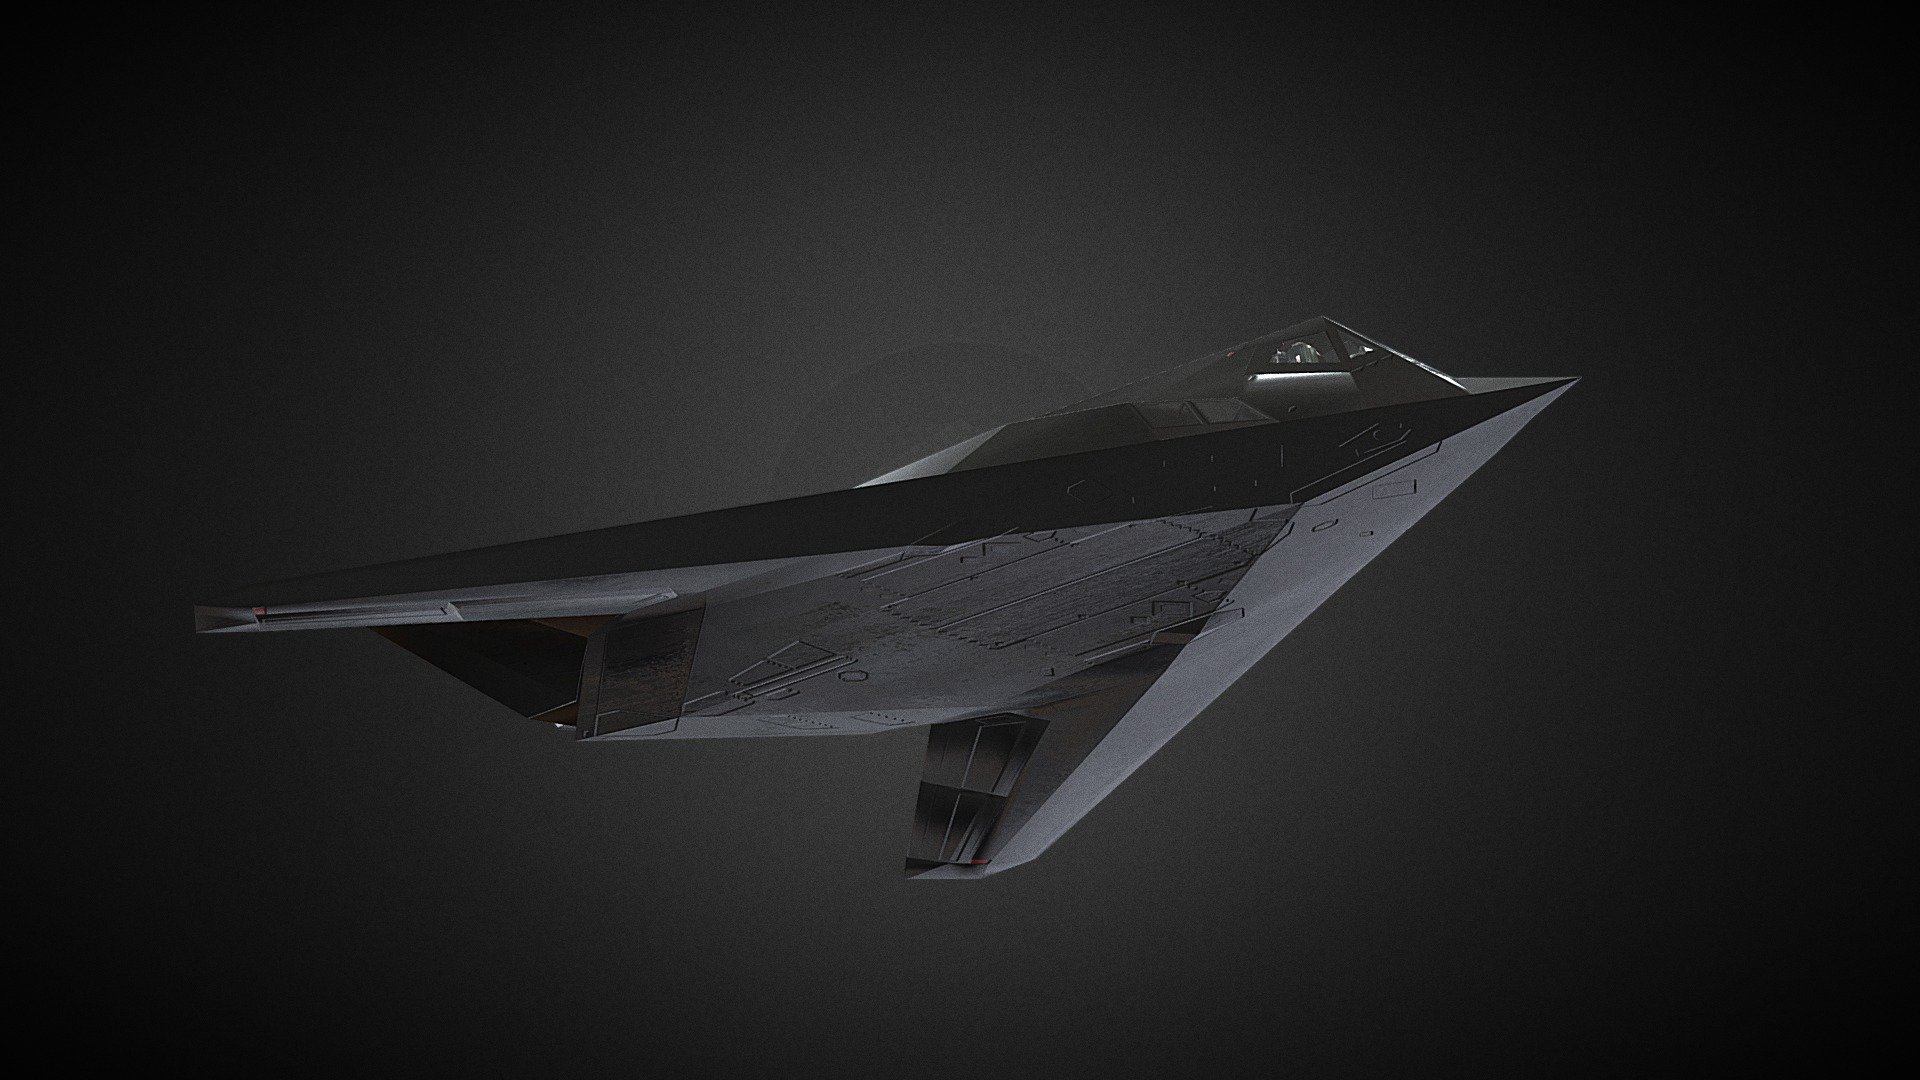 The Lockheed F-117 Nighthawk is a retired American single-seat, subsonic twin-engine stealth attack aircraft developed by Lockheed's secretive Skunk Works division and operated by the United States Air Force (USAF). It was the first operational aircraft to be designed with stealth technology 3d model